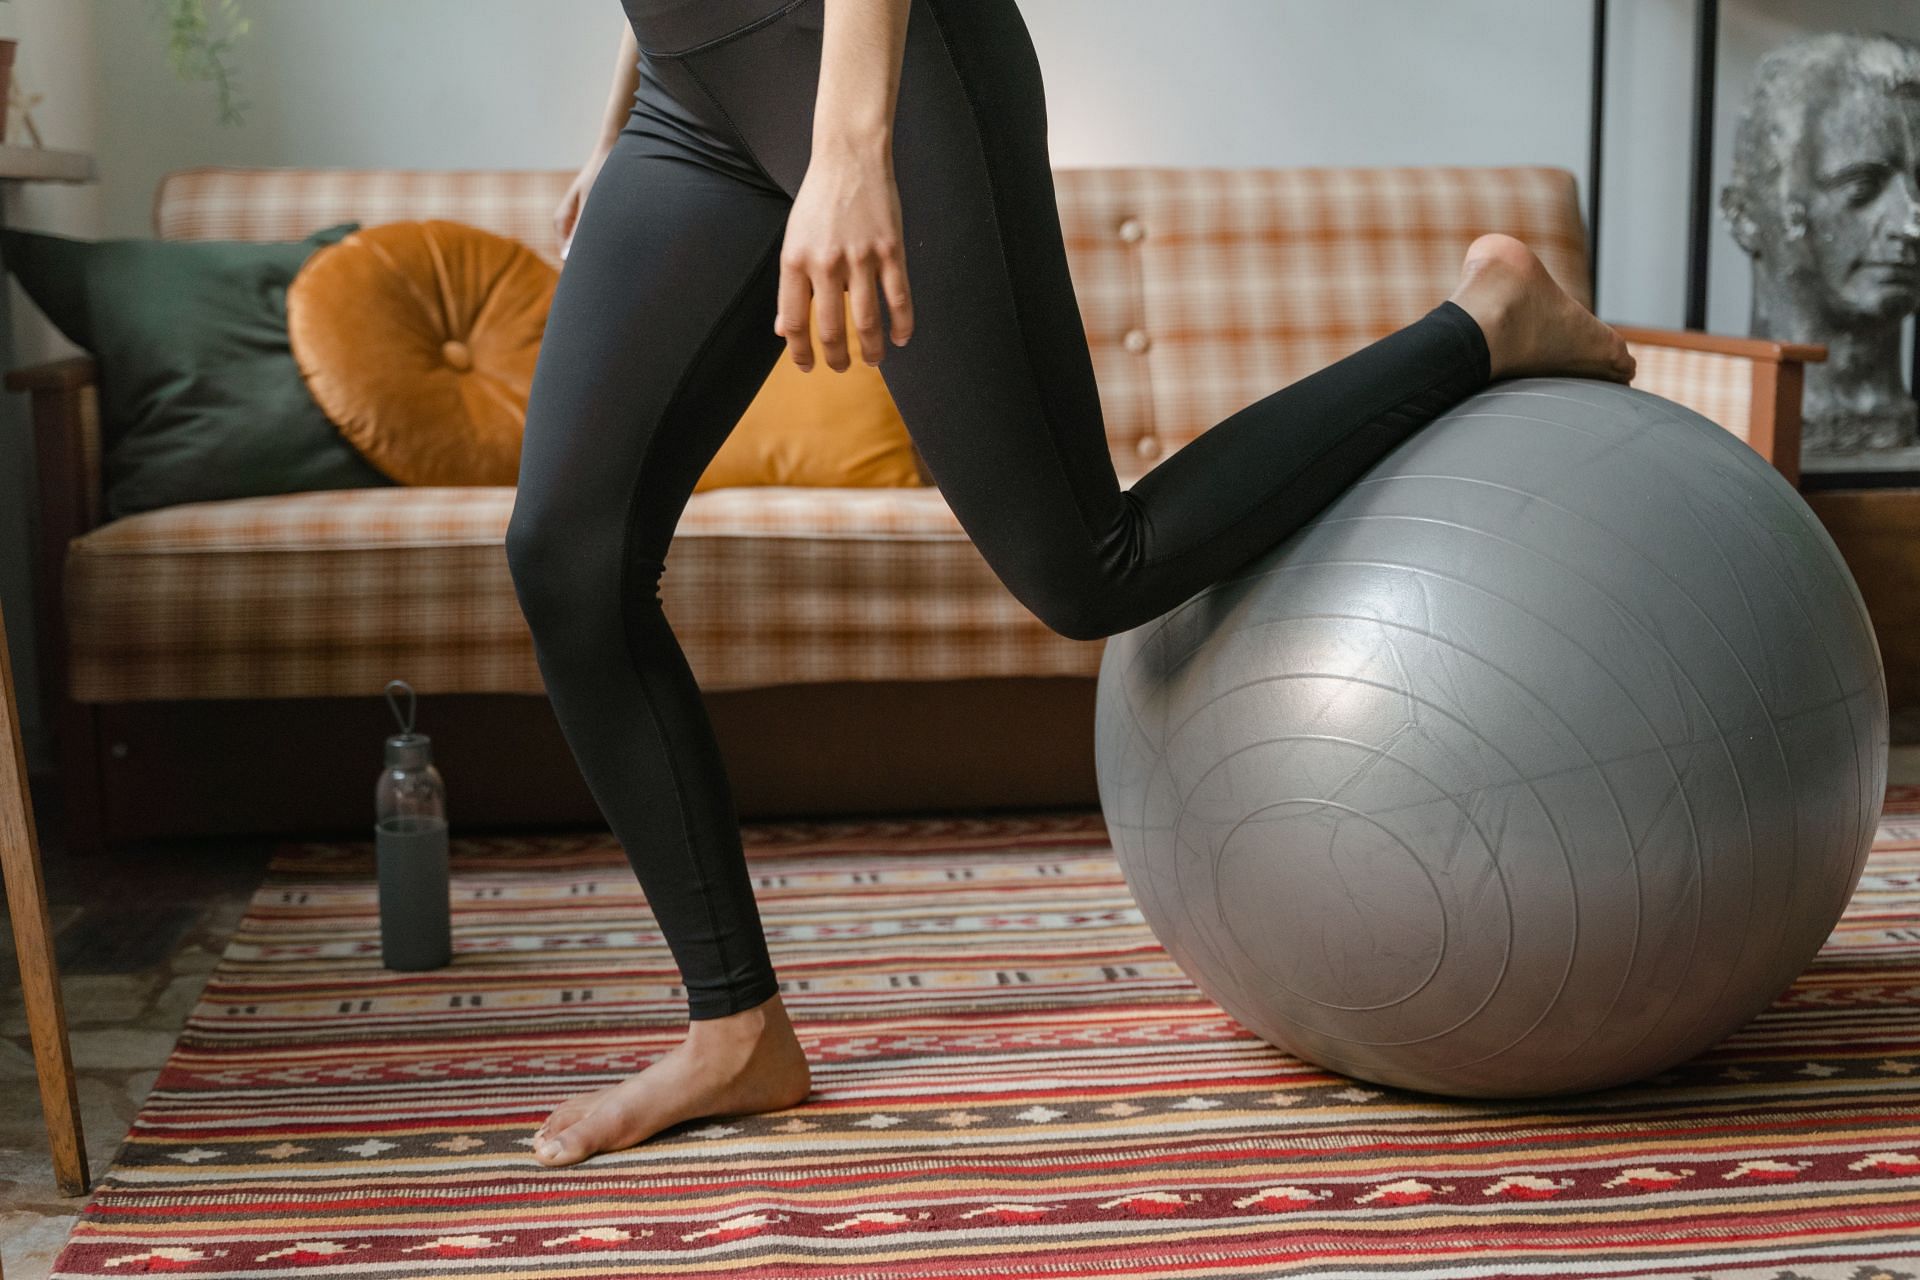 Ball workouts are more fun when done in a group (Image via Pexels/Mart Production)